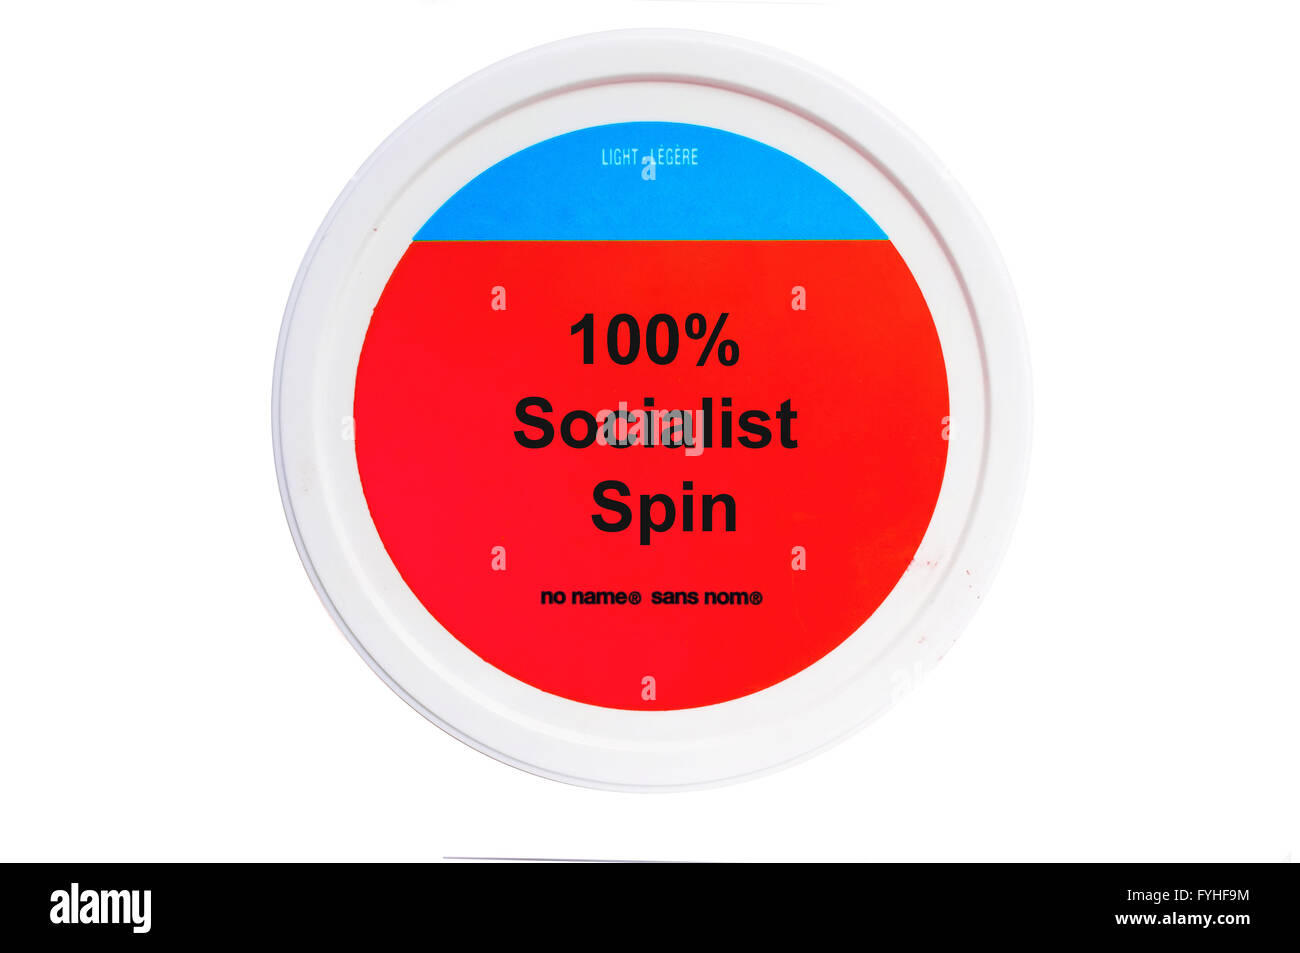 A tub with 100% Socialist Spin written on the label photographed against a white background. Stock Photo